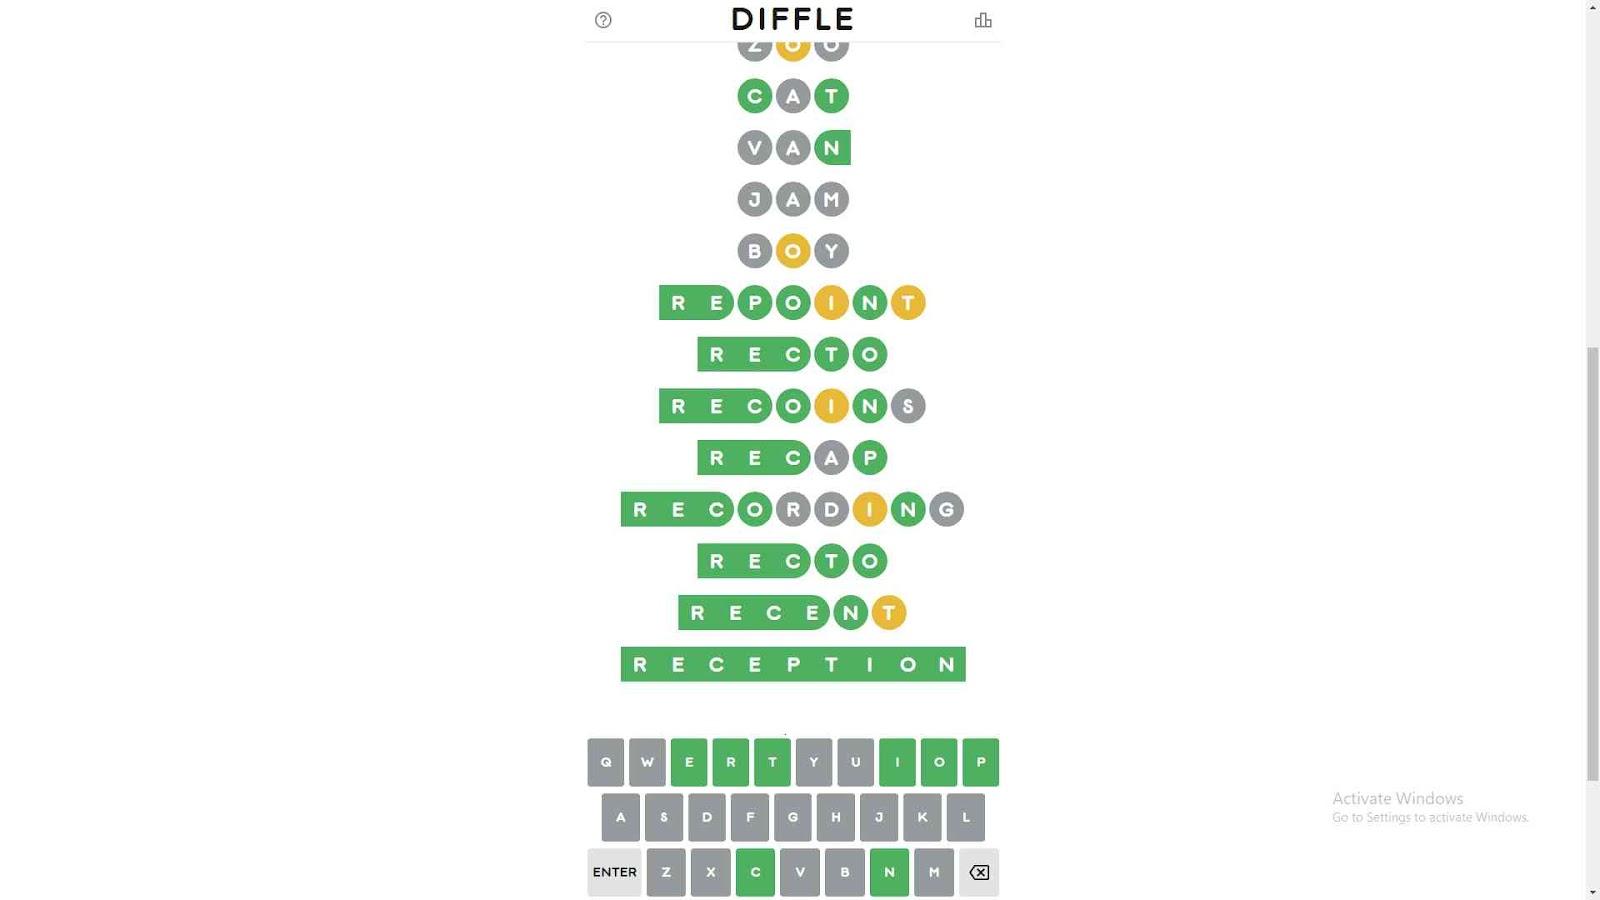 Tips and Tricks to Play Diffle